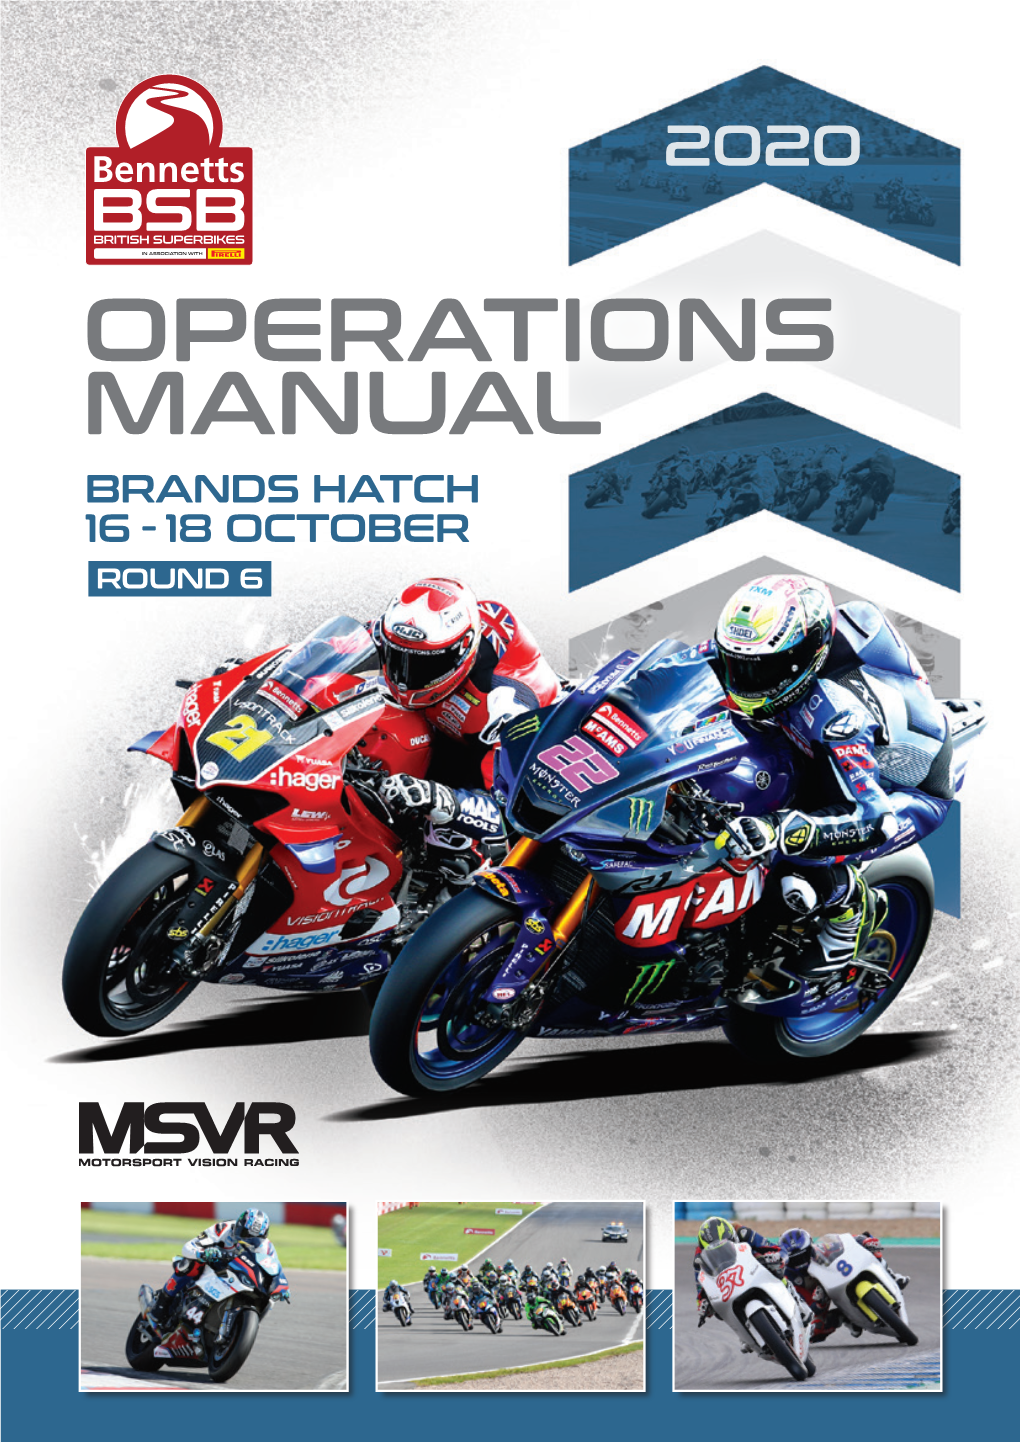 Operations Manual Brands Hatch 16 - 18 October Round 6